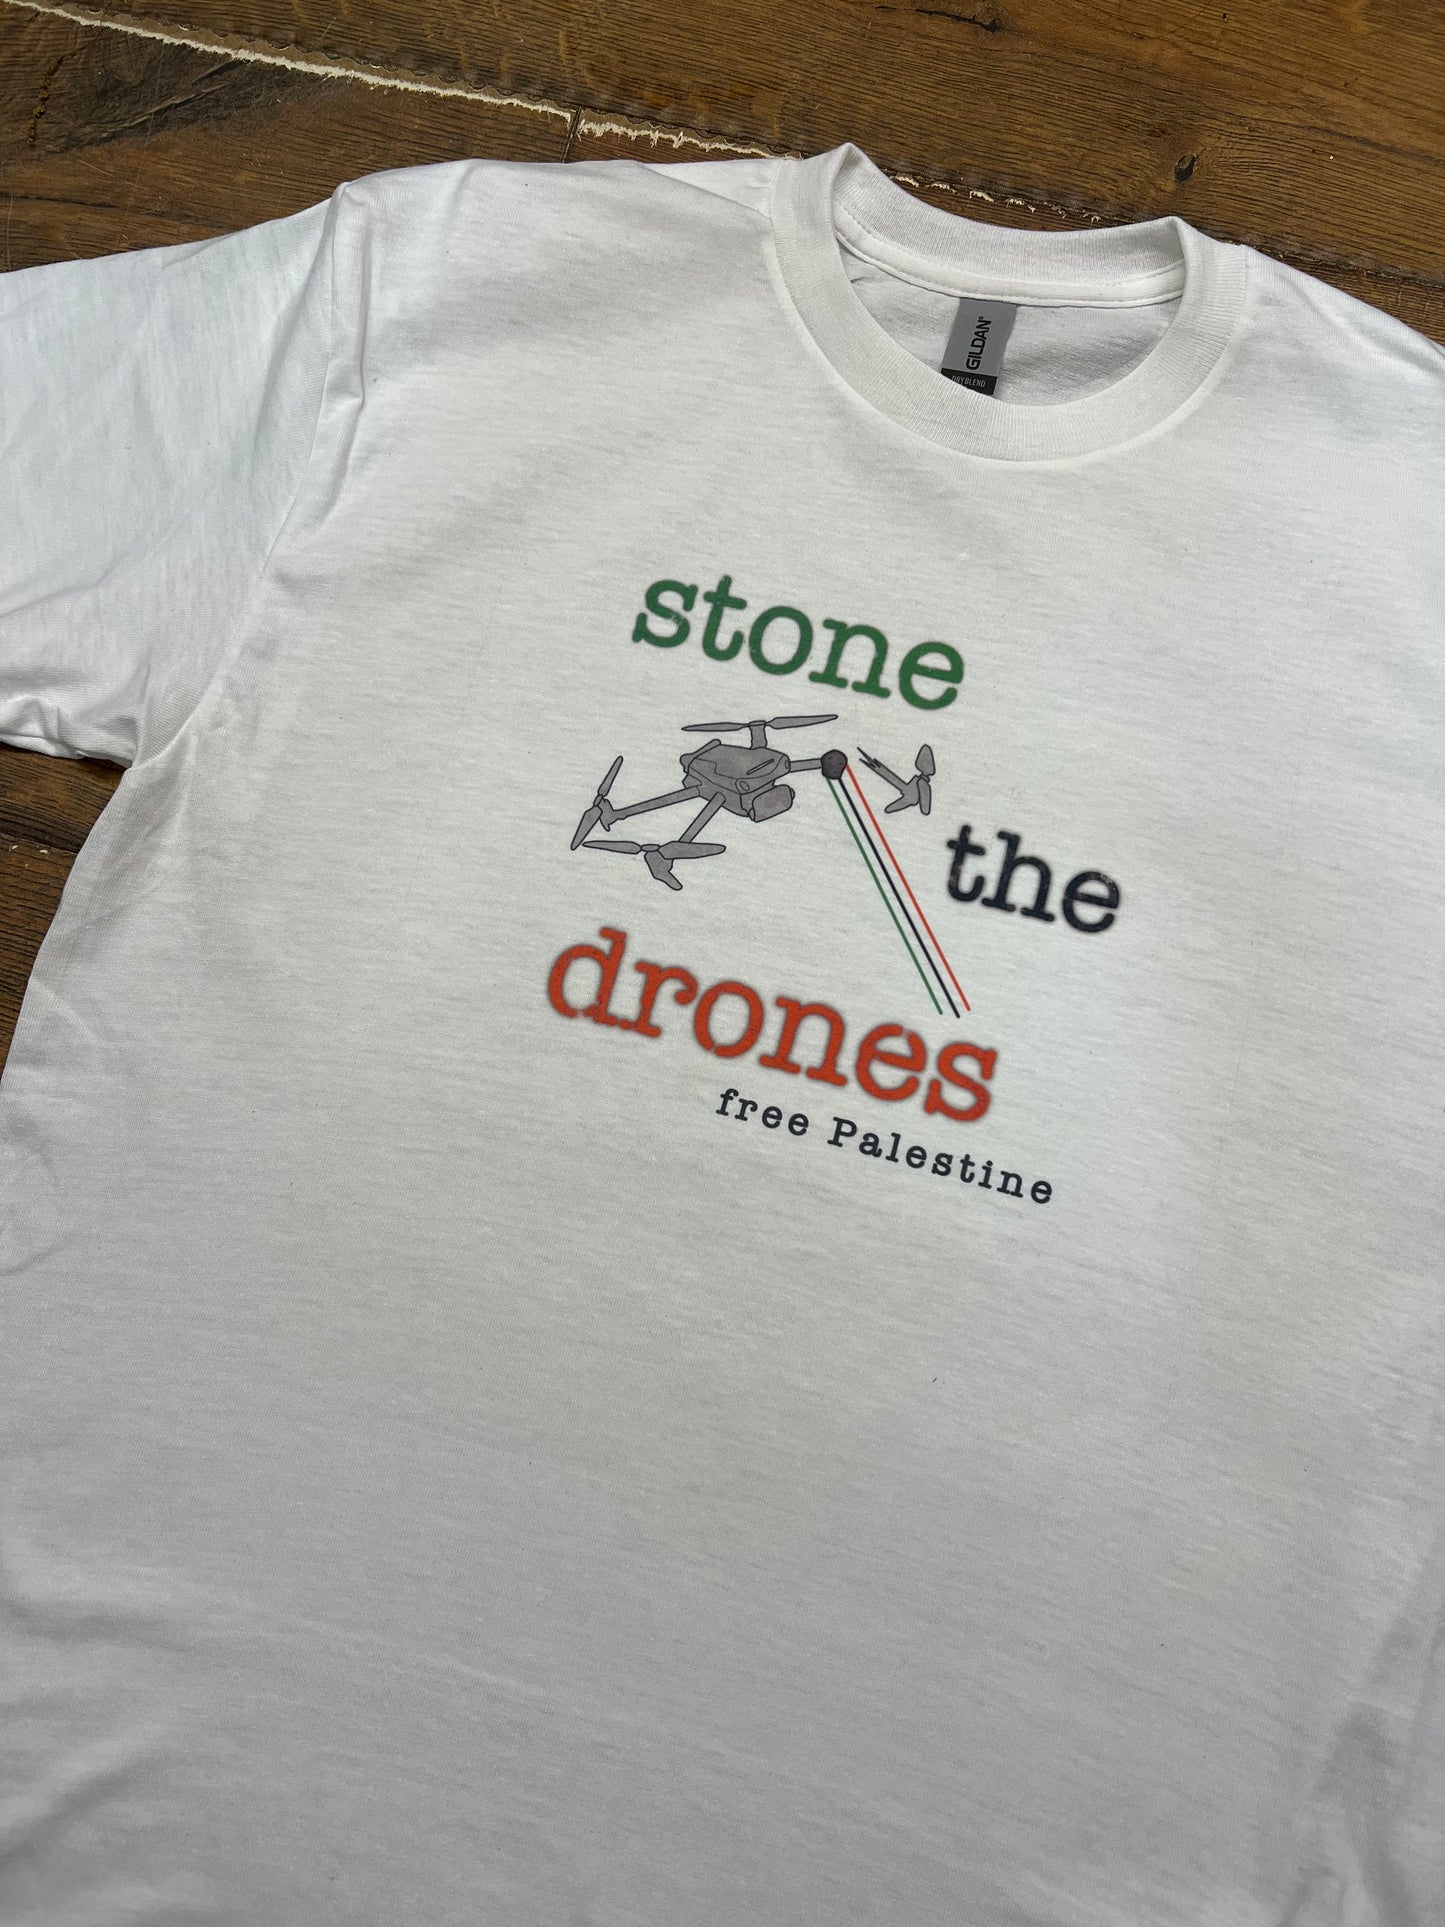 Stone the Drones T Shirt - Funding Operation Olive Branch - Zarifa Family